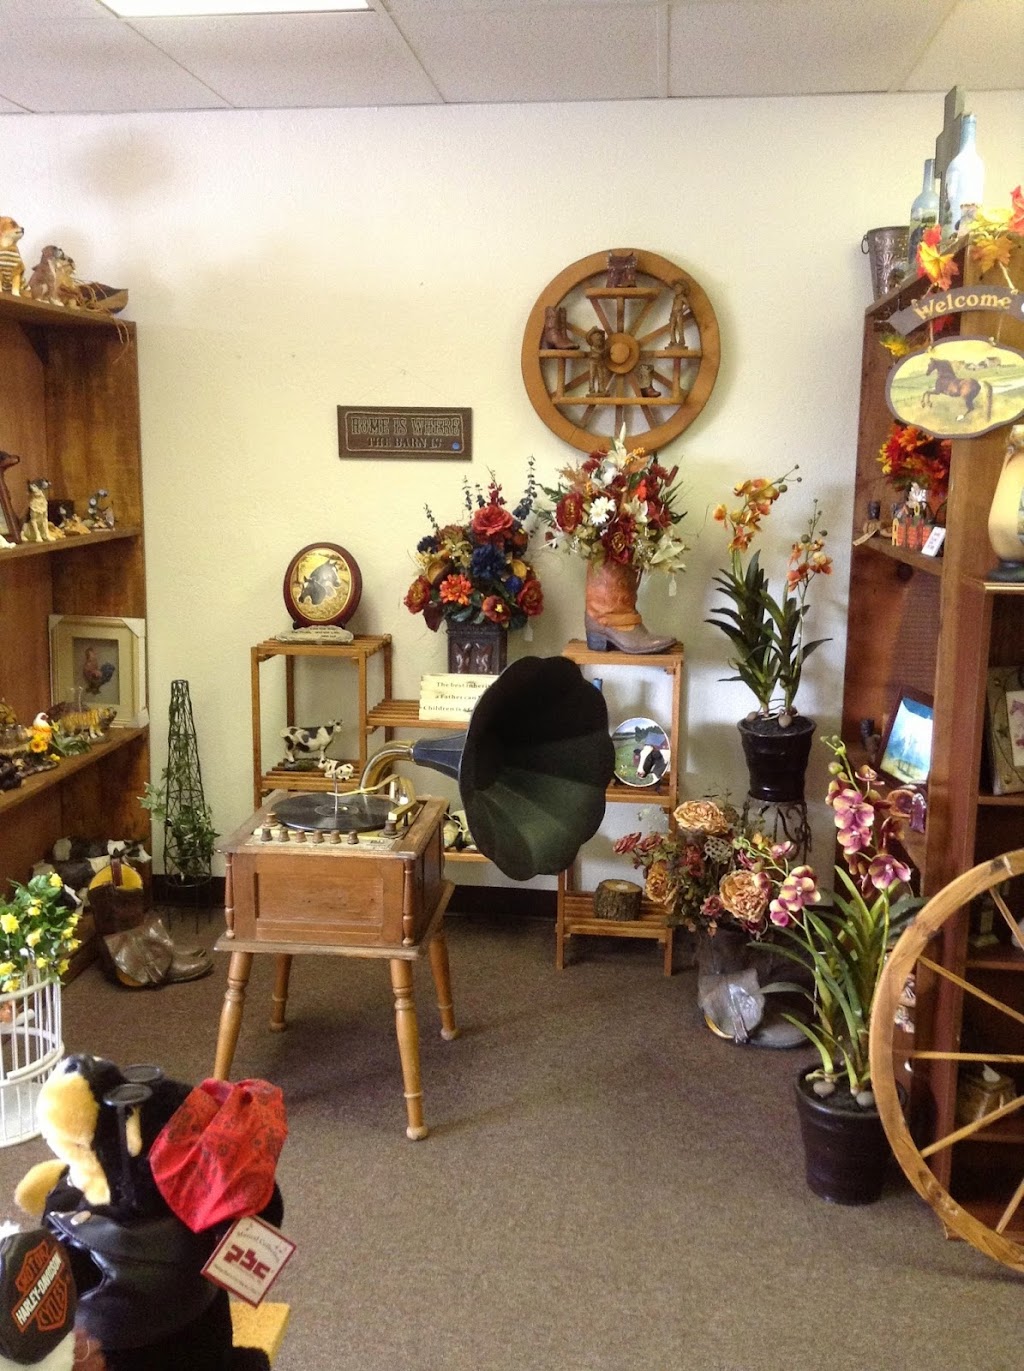 Blessings in Bloom Flowers & Gifts | 247 W 6th St, Chelsea, OK 74016 | Phone: (918) 789-3590